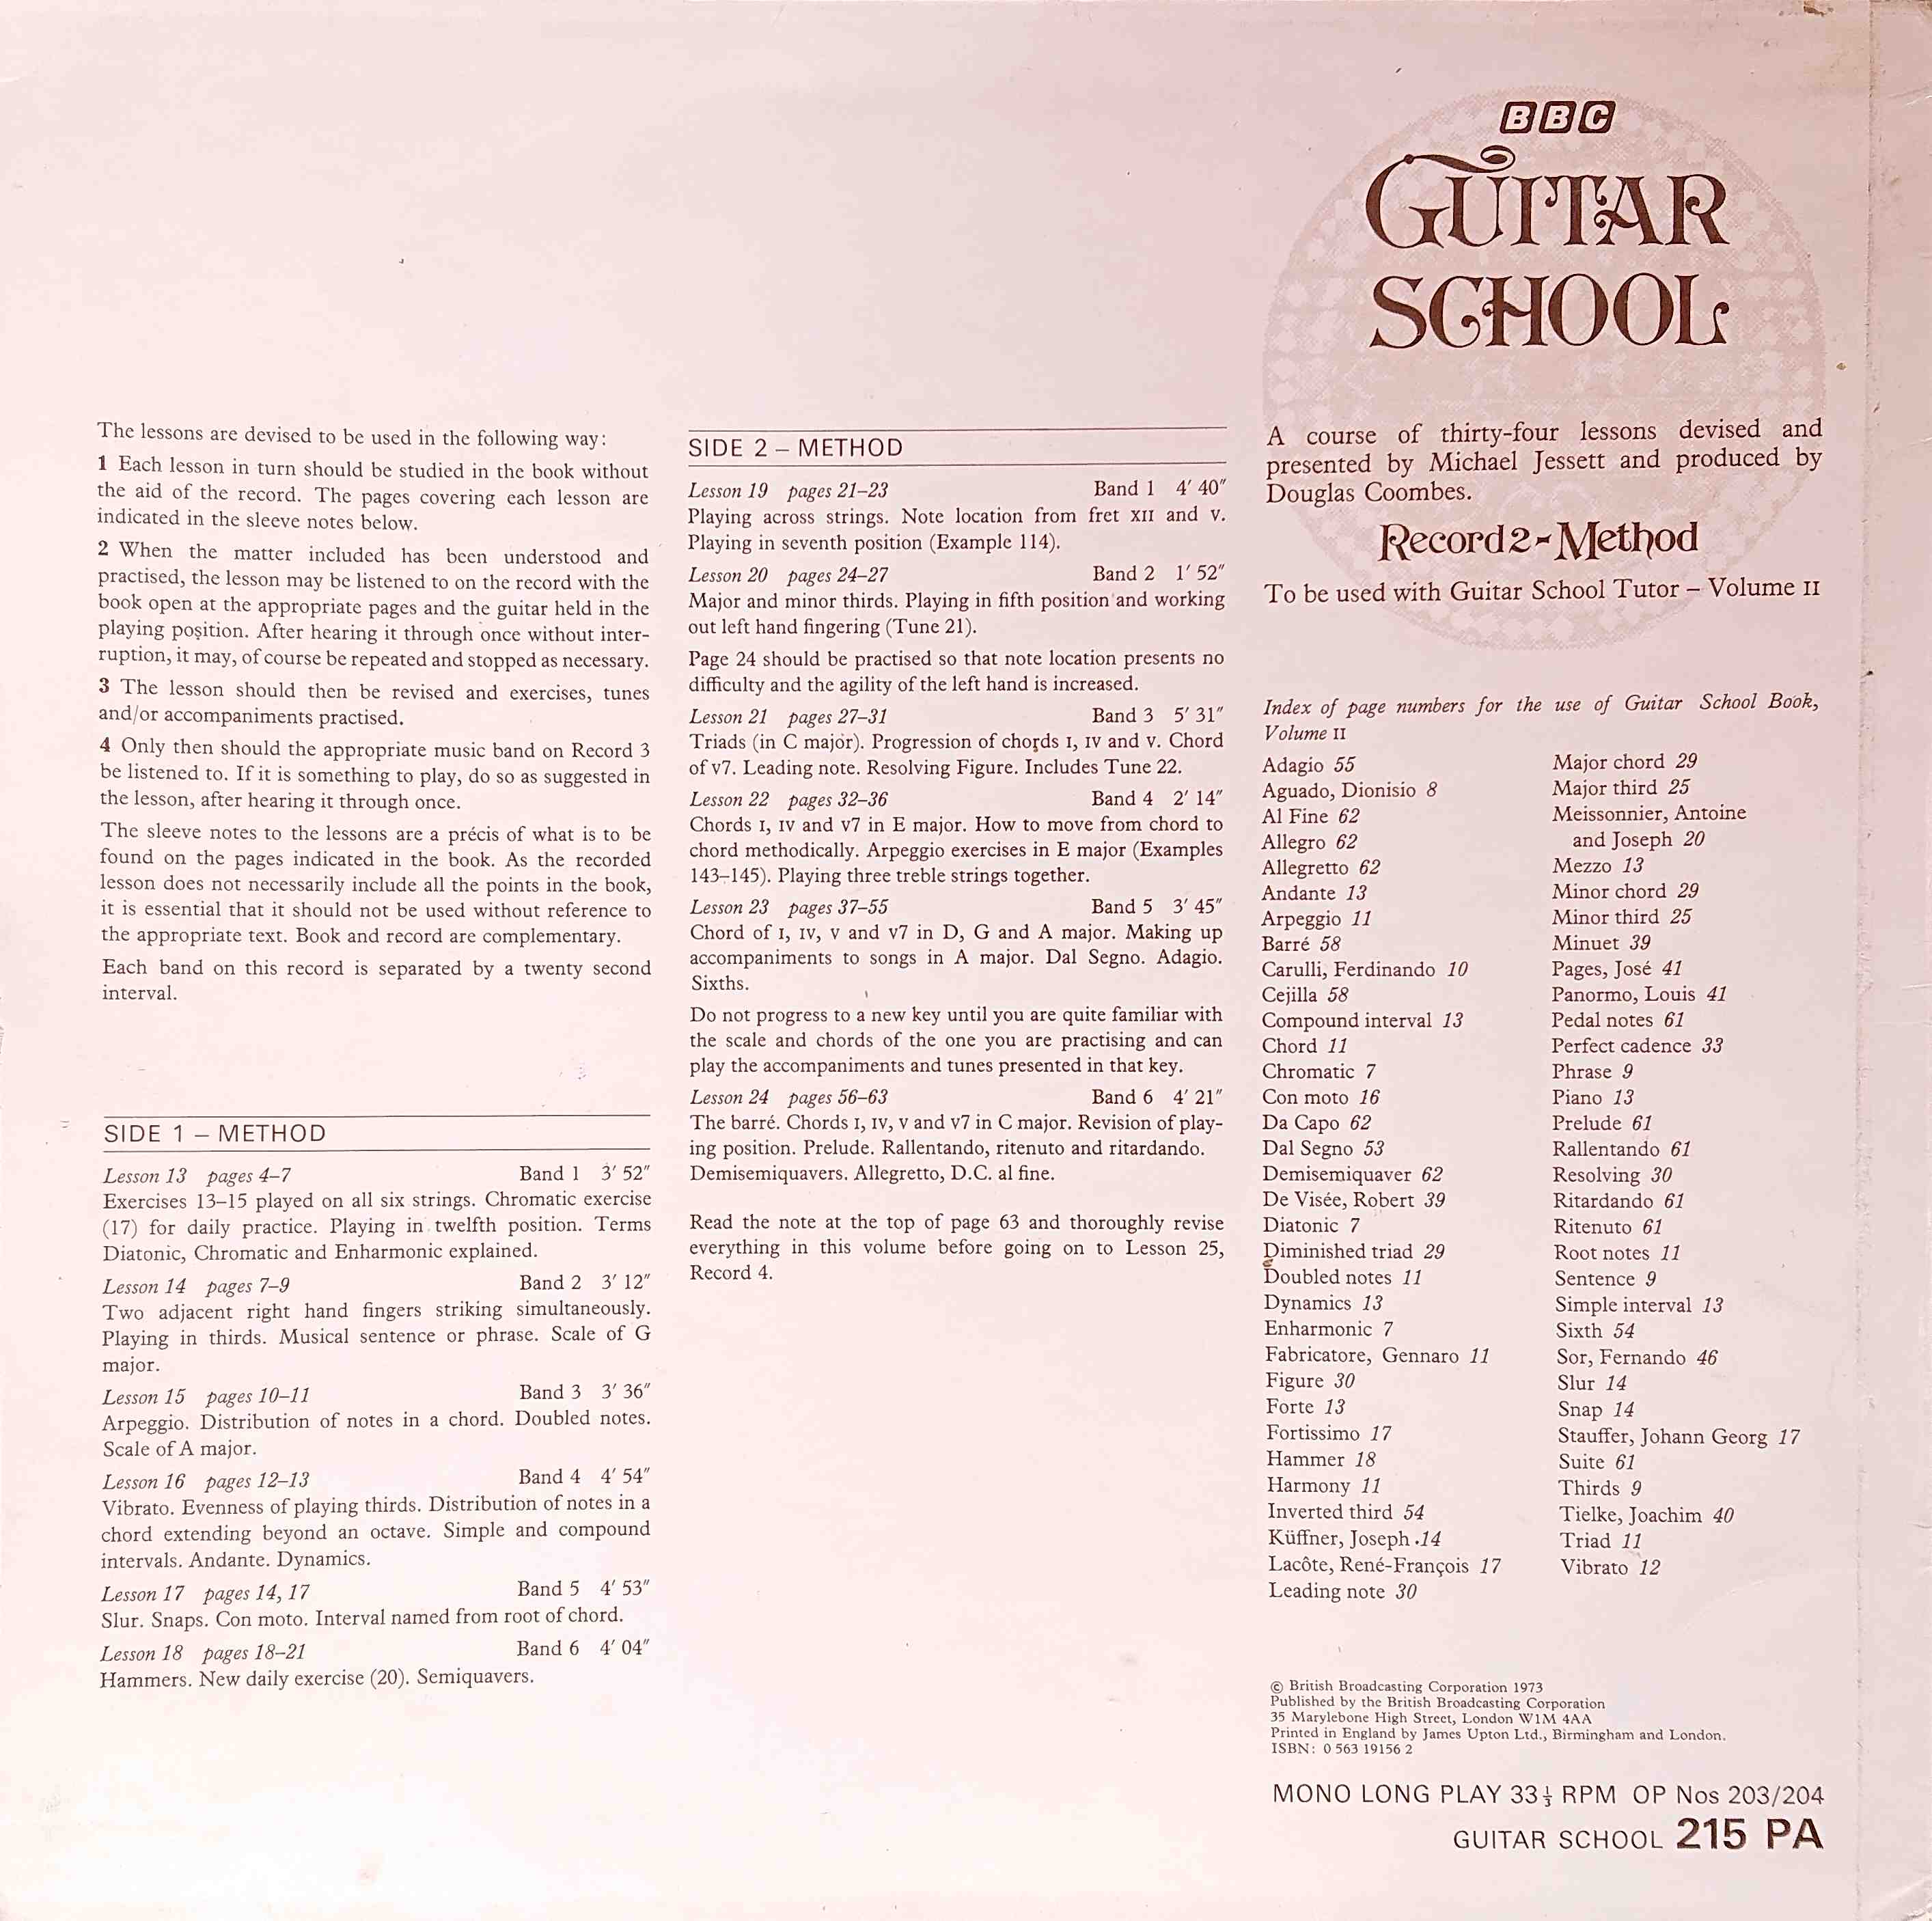 Picture of OP 203/204 Guitar school - Record 2 - Method by artist Michael Jessett from the BBC records and Tapes library